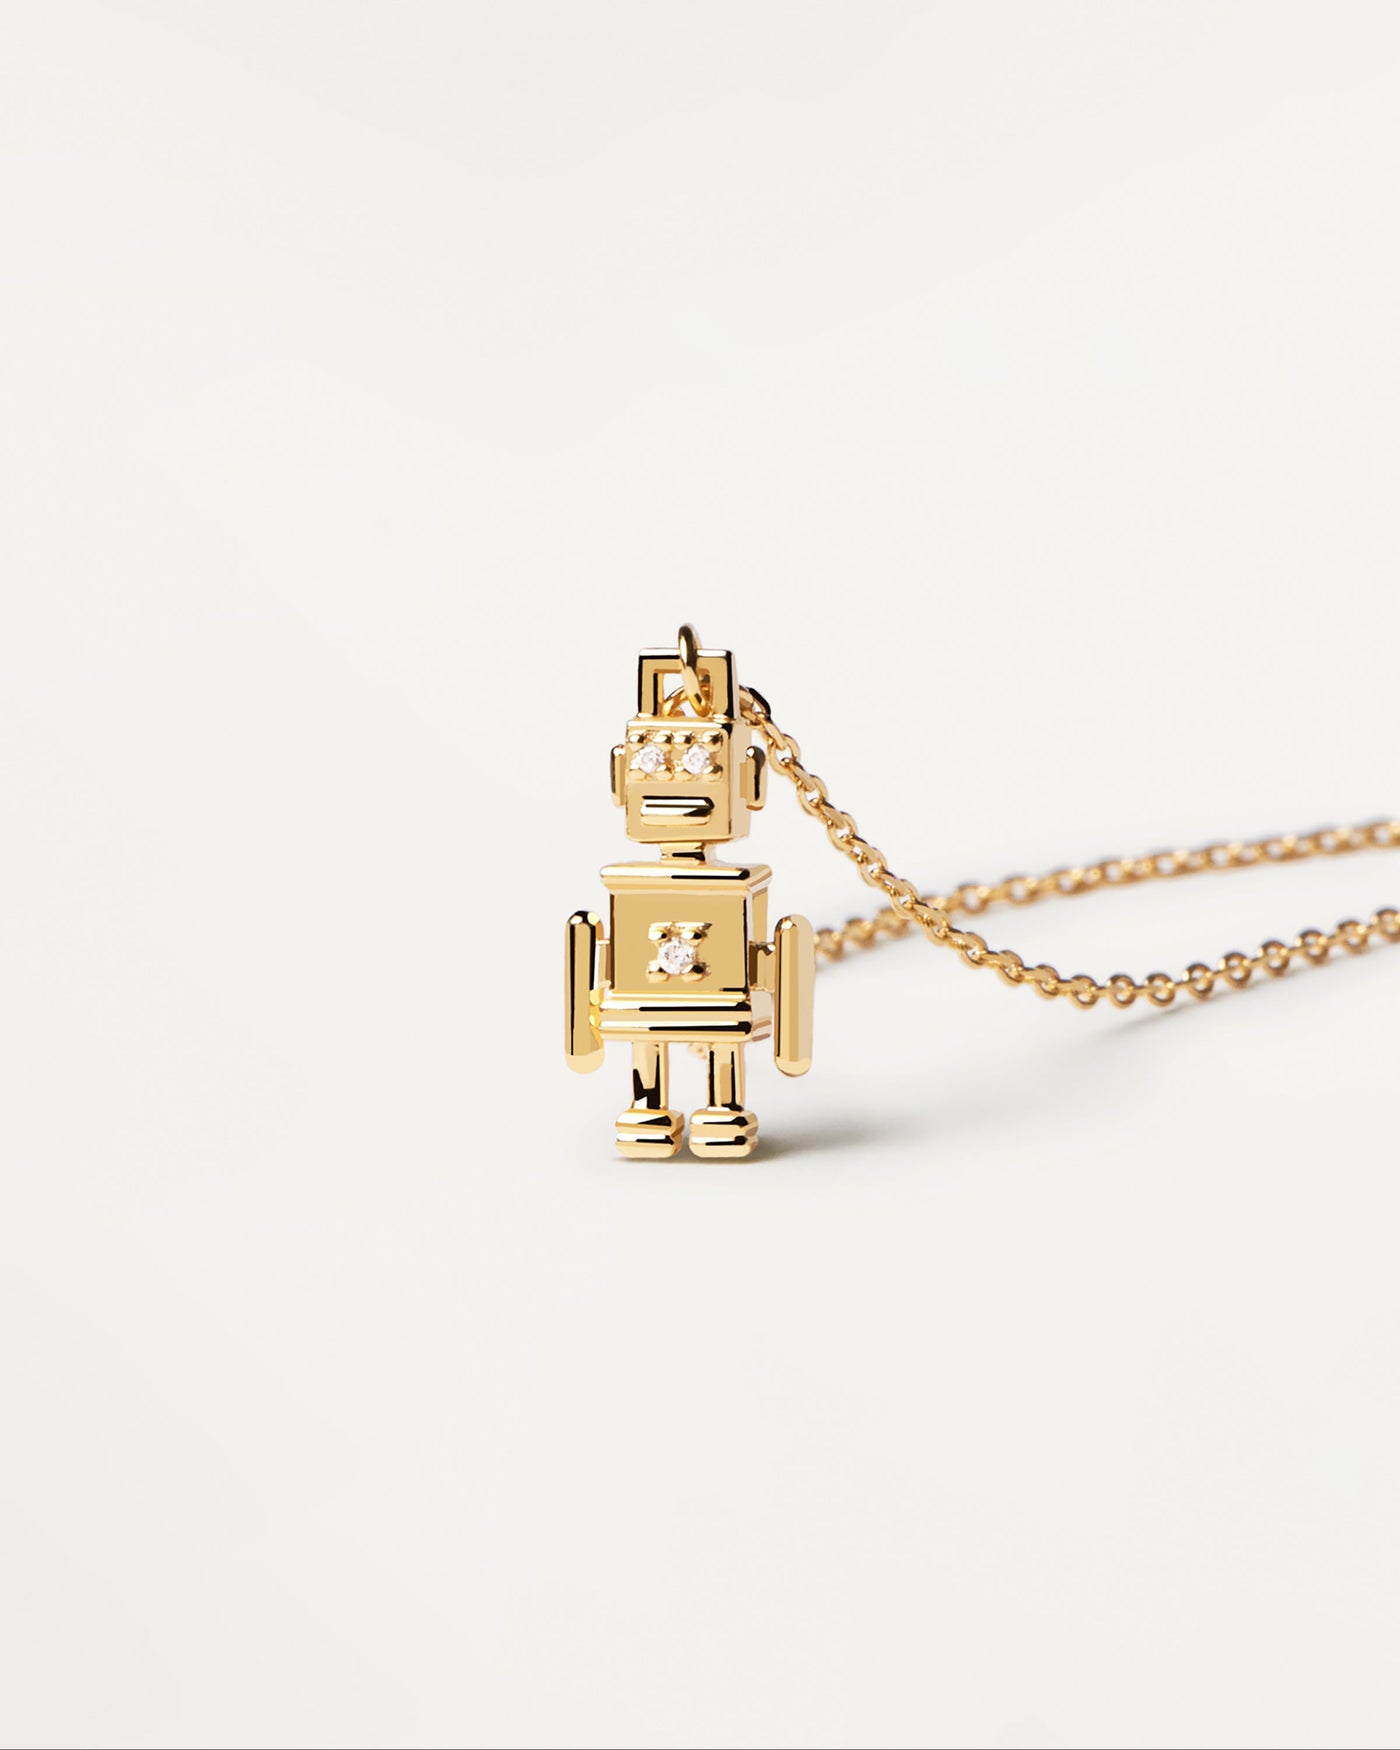 2023 Selection | Robert Necklace. Gold-plated silver necklace with a robot pendant. Get the latest arrival from PDPAOLA. Place your order safely and get this Best Seller. Free Shipping.